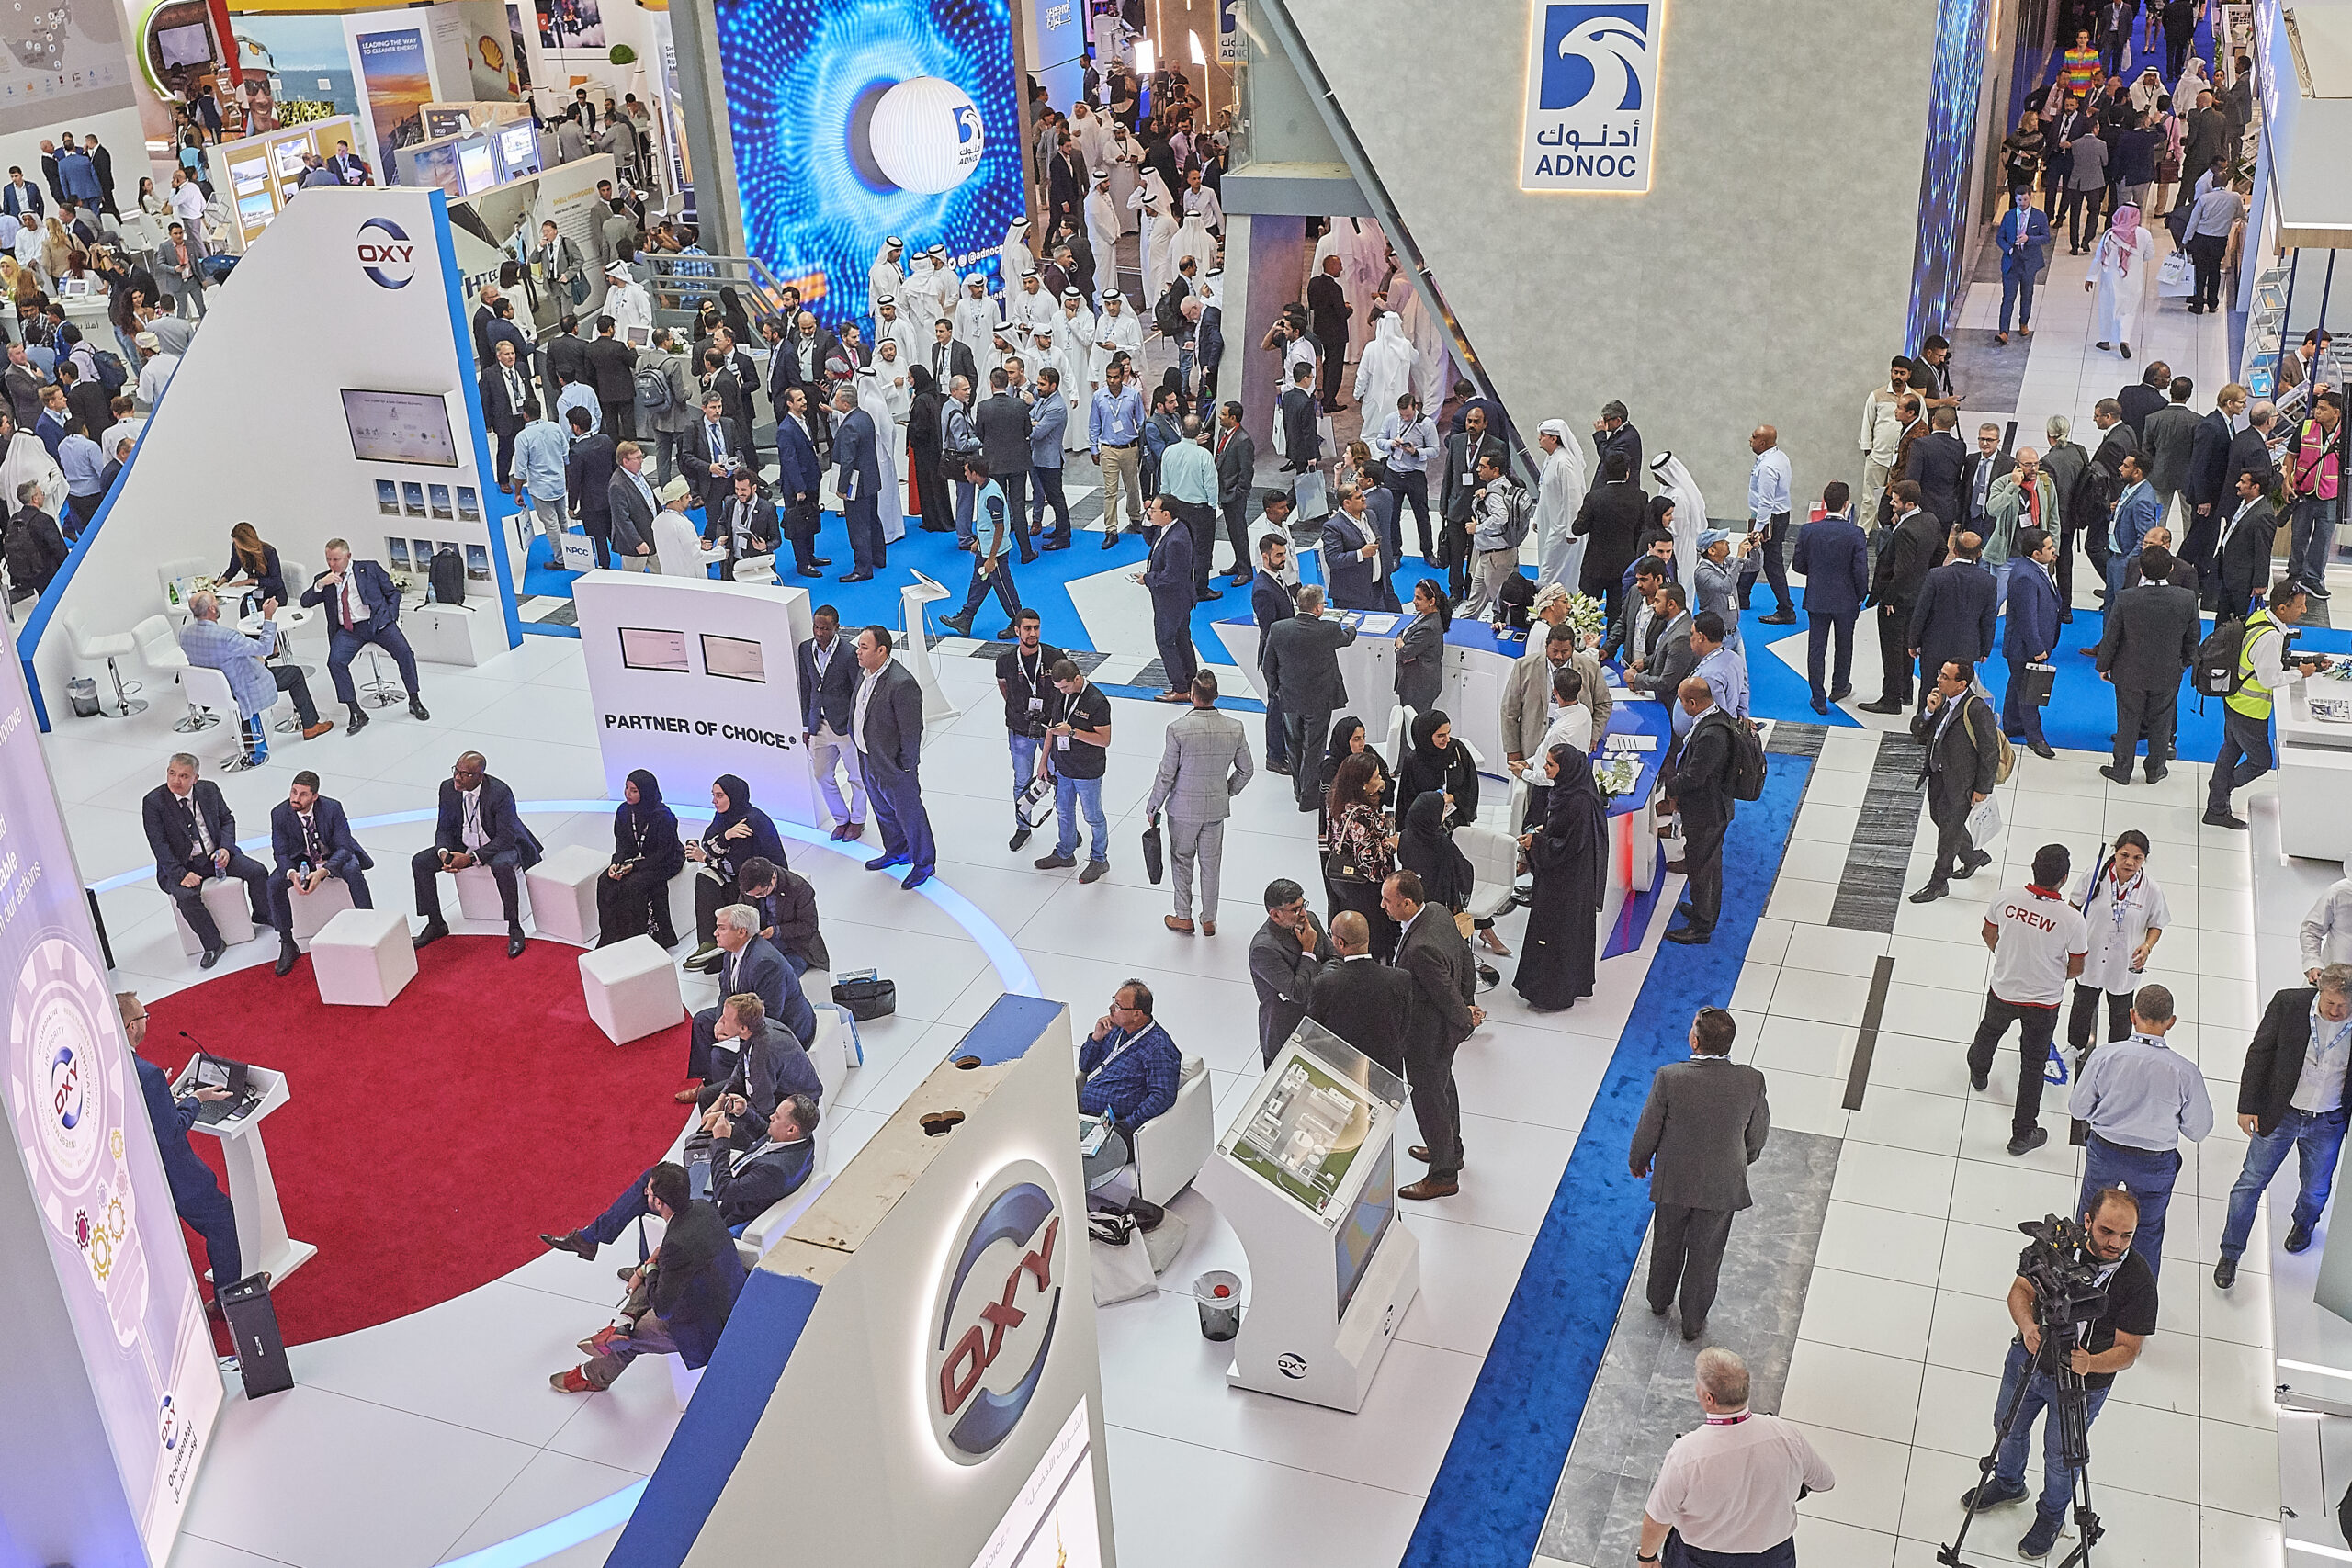 Road to Adipec: Taking the transition forward